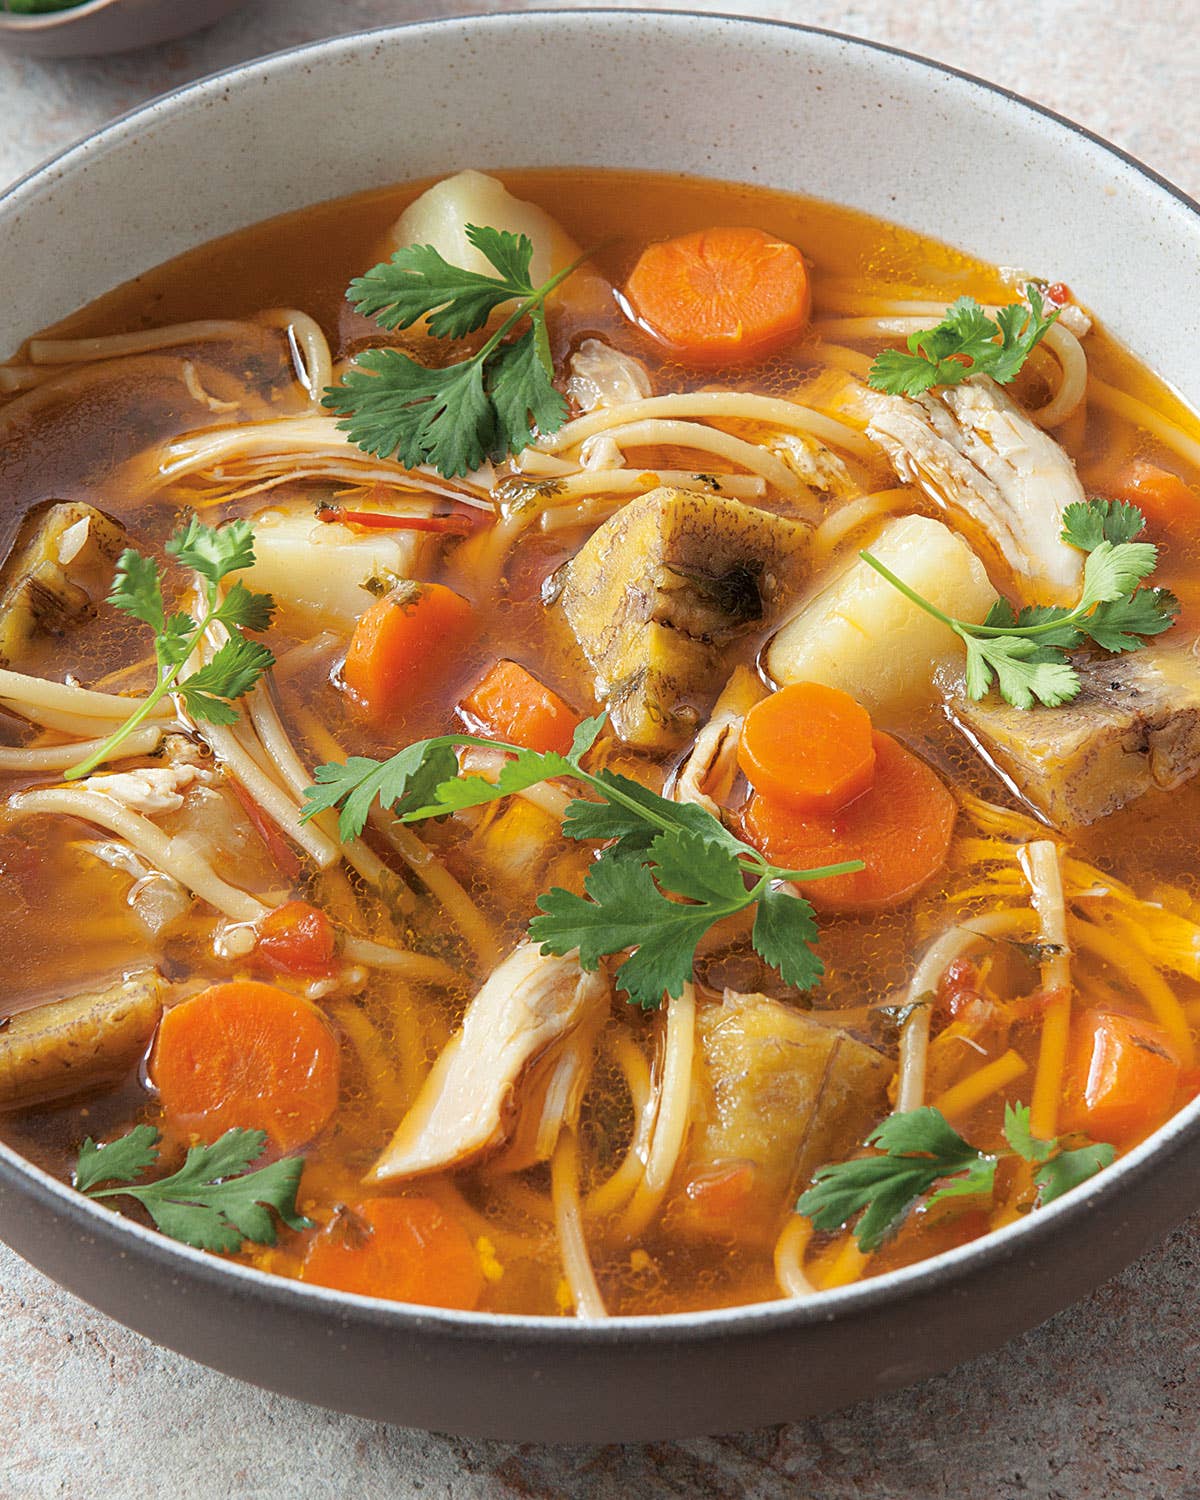 Chicken and Root Vegetable Soup (Sancocho)